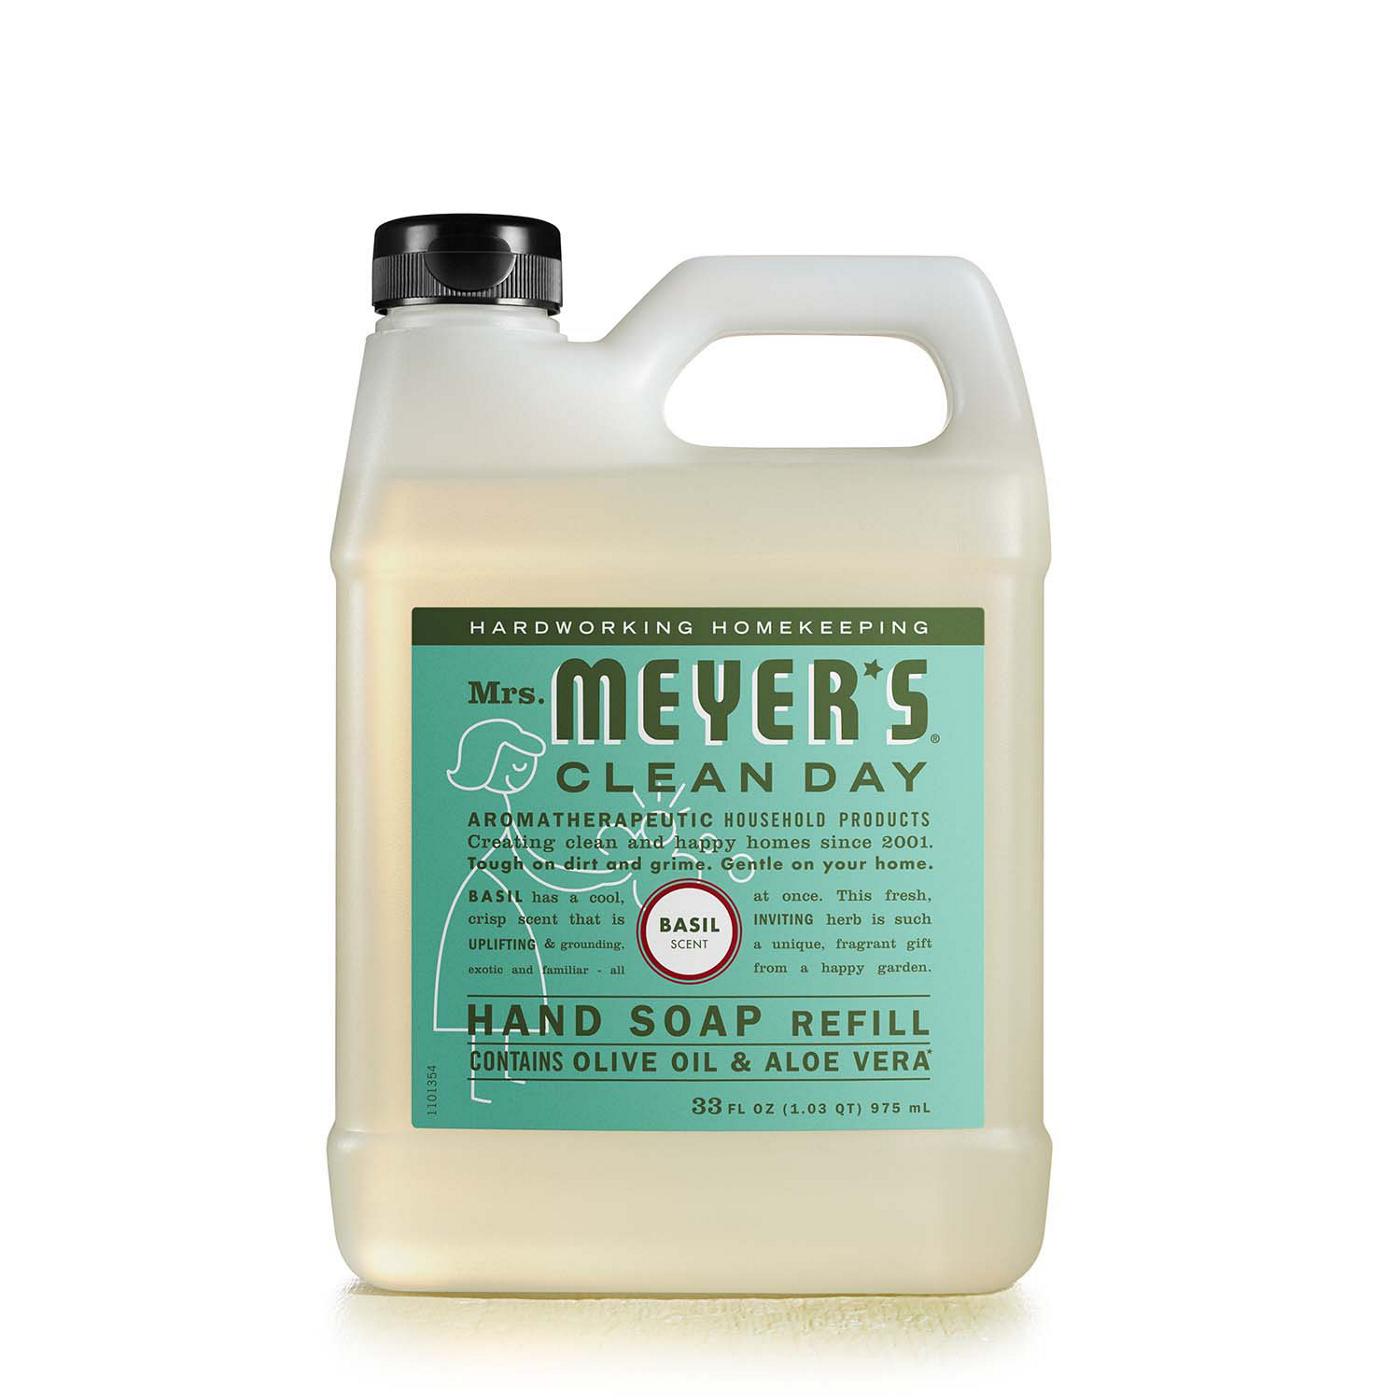 Mrs. Meyer's Clean Day Basil Liquid Hand Soap Refill; image 1 of 3